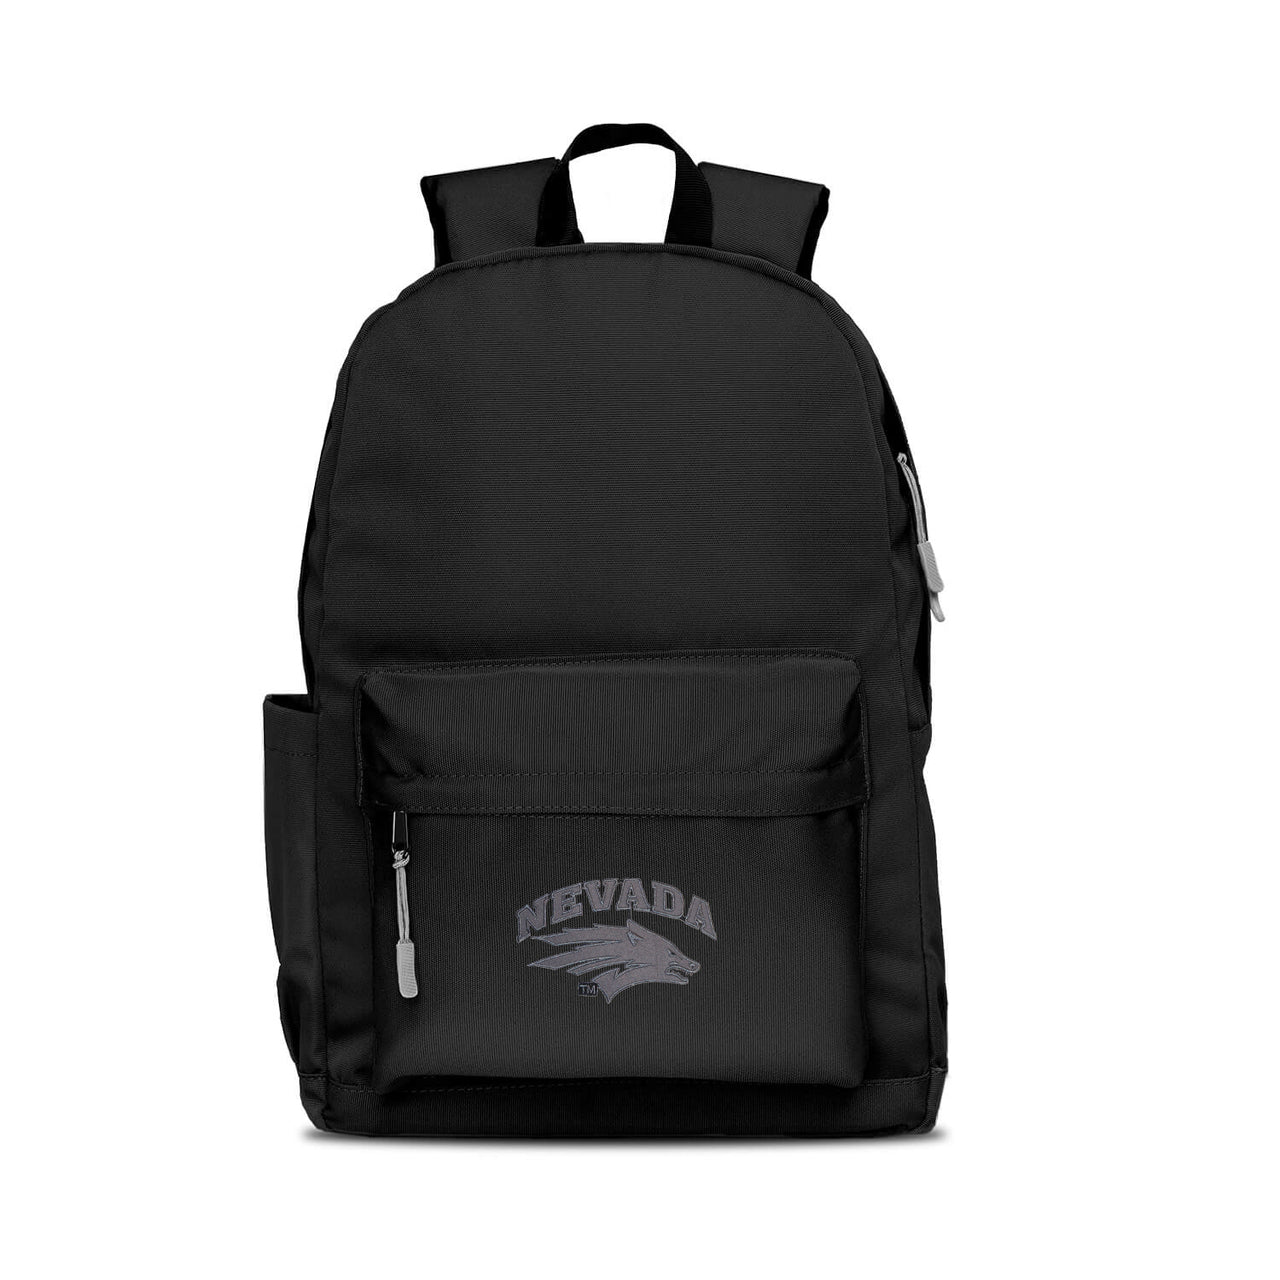 Nevada Wolf Pack Campus Laptop Backpack- Black